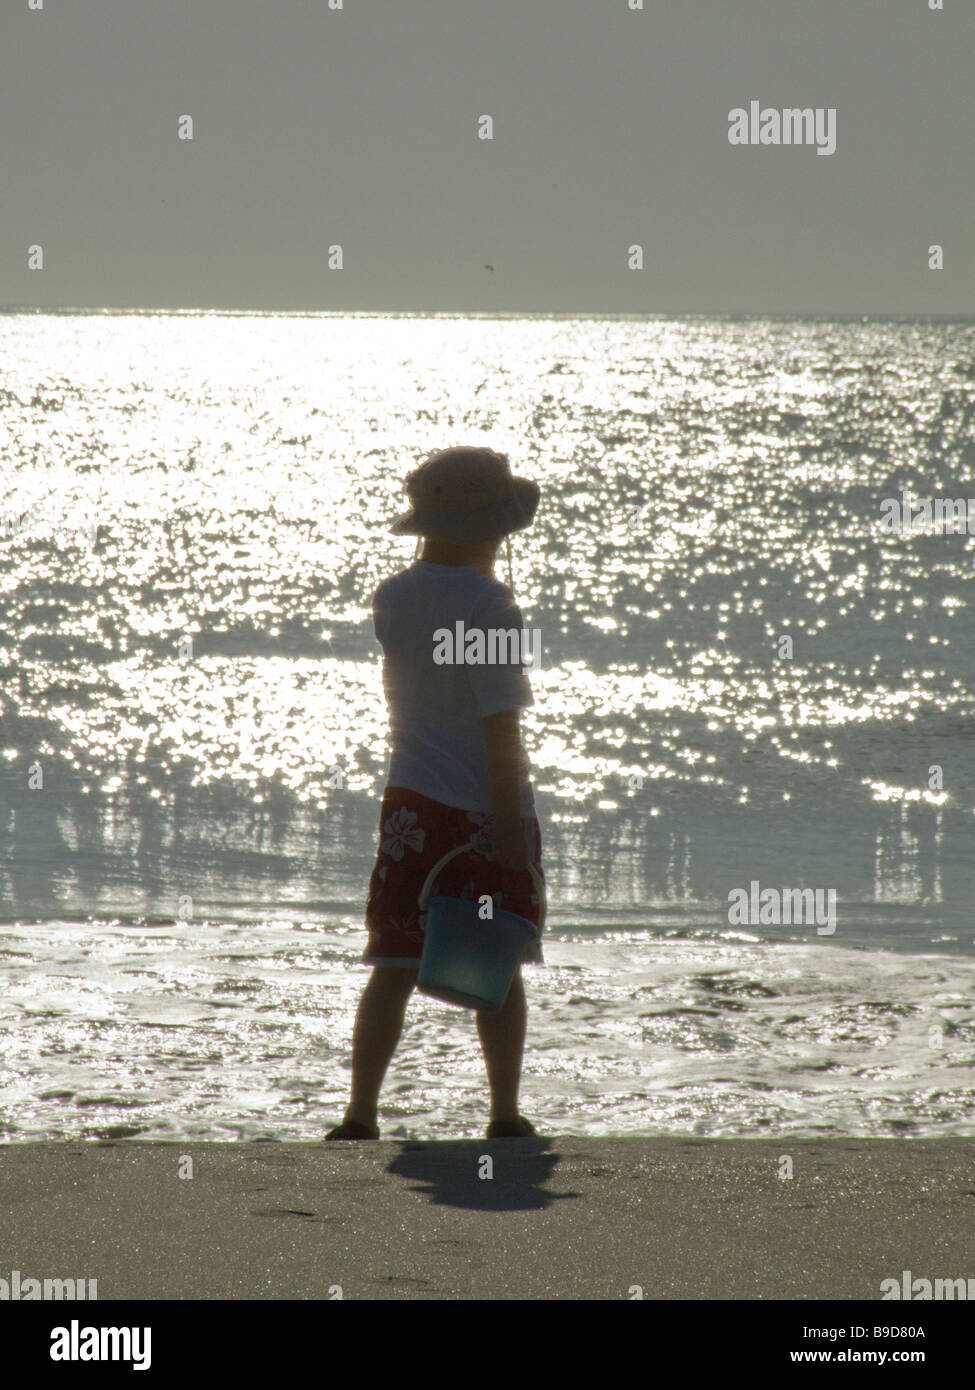 boy on beach with bucked playing near ocean waves Stock Photo